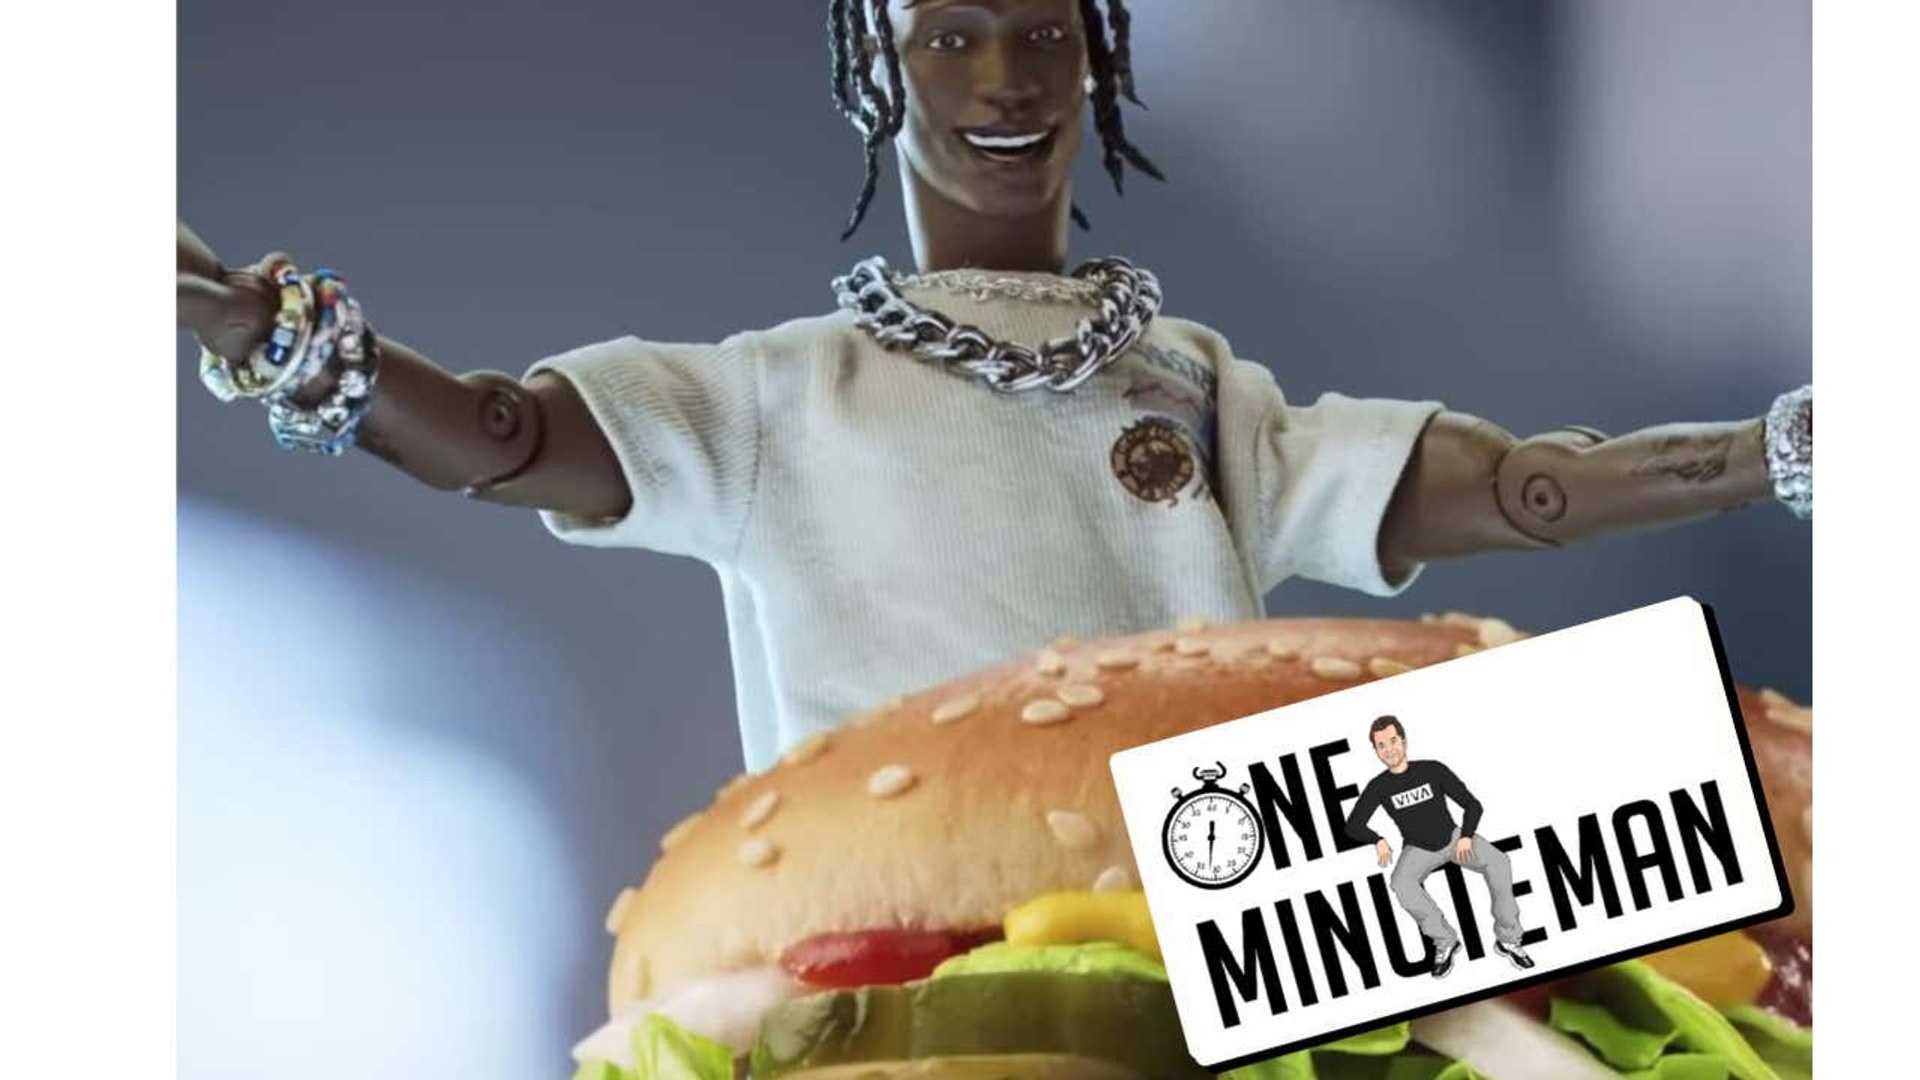 One Minute Man Hypebeasts Are Torturing Mcdonalds Employees Because Of Travis Scott Video Dailymotion - roblox mcdonalds worker